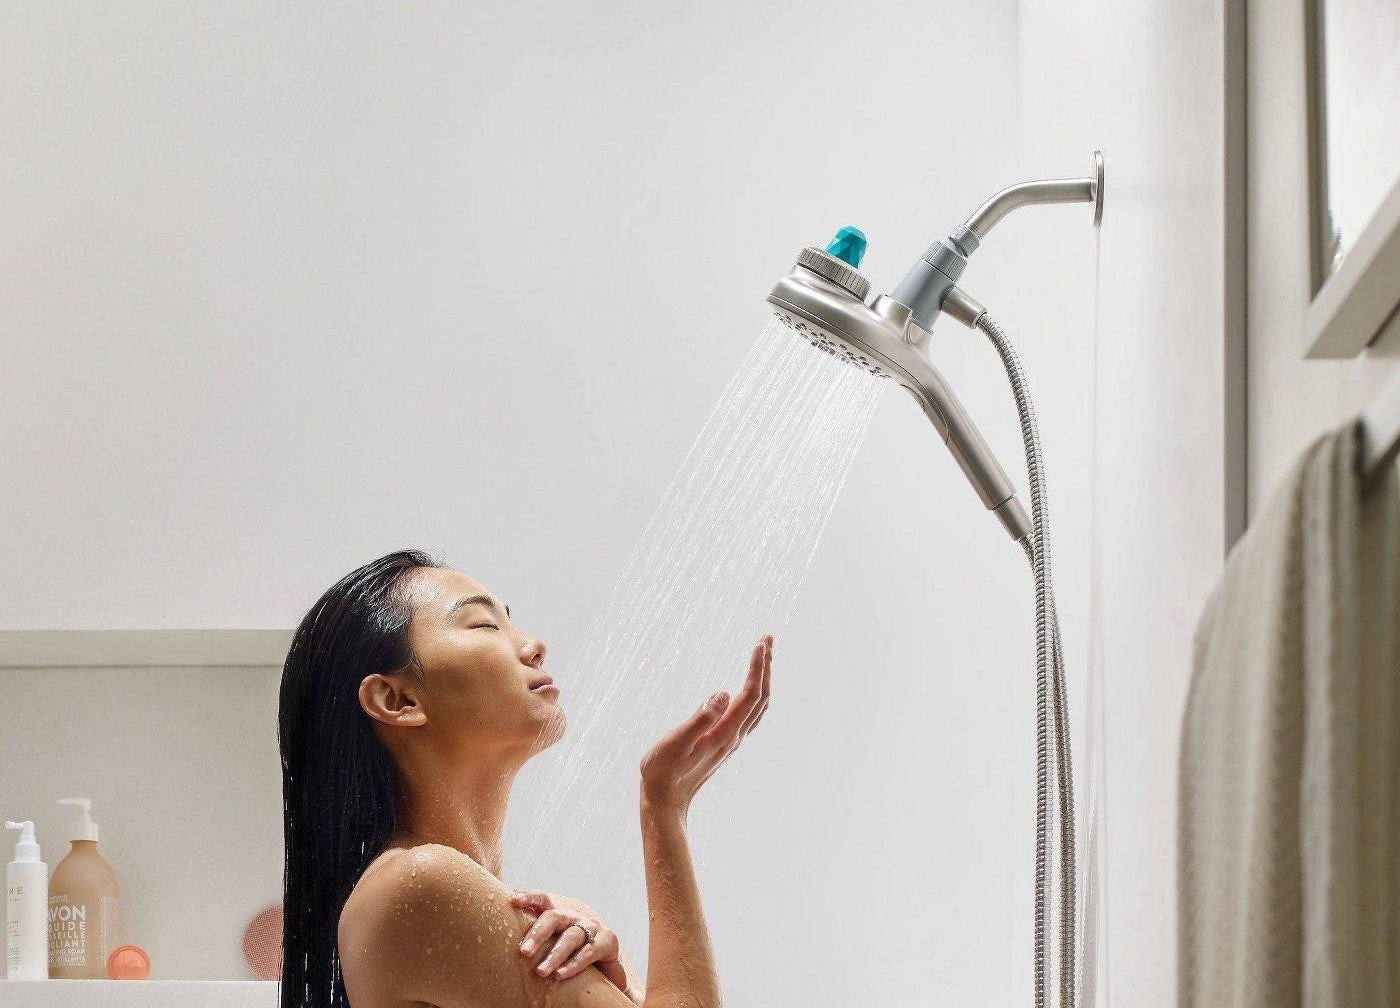 The brushed nickel shower head with a blue fragrance capsule